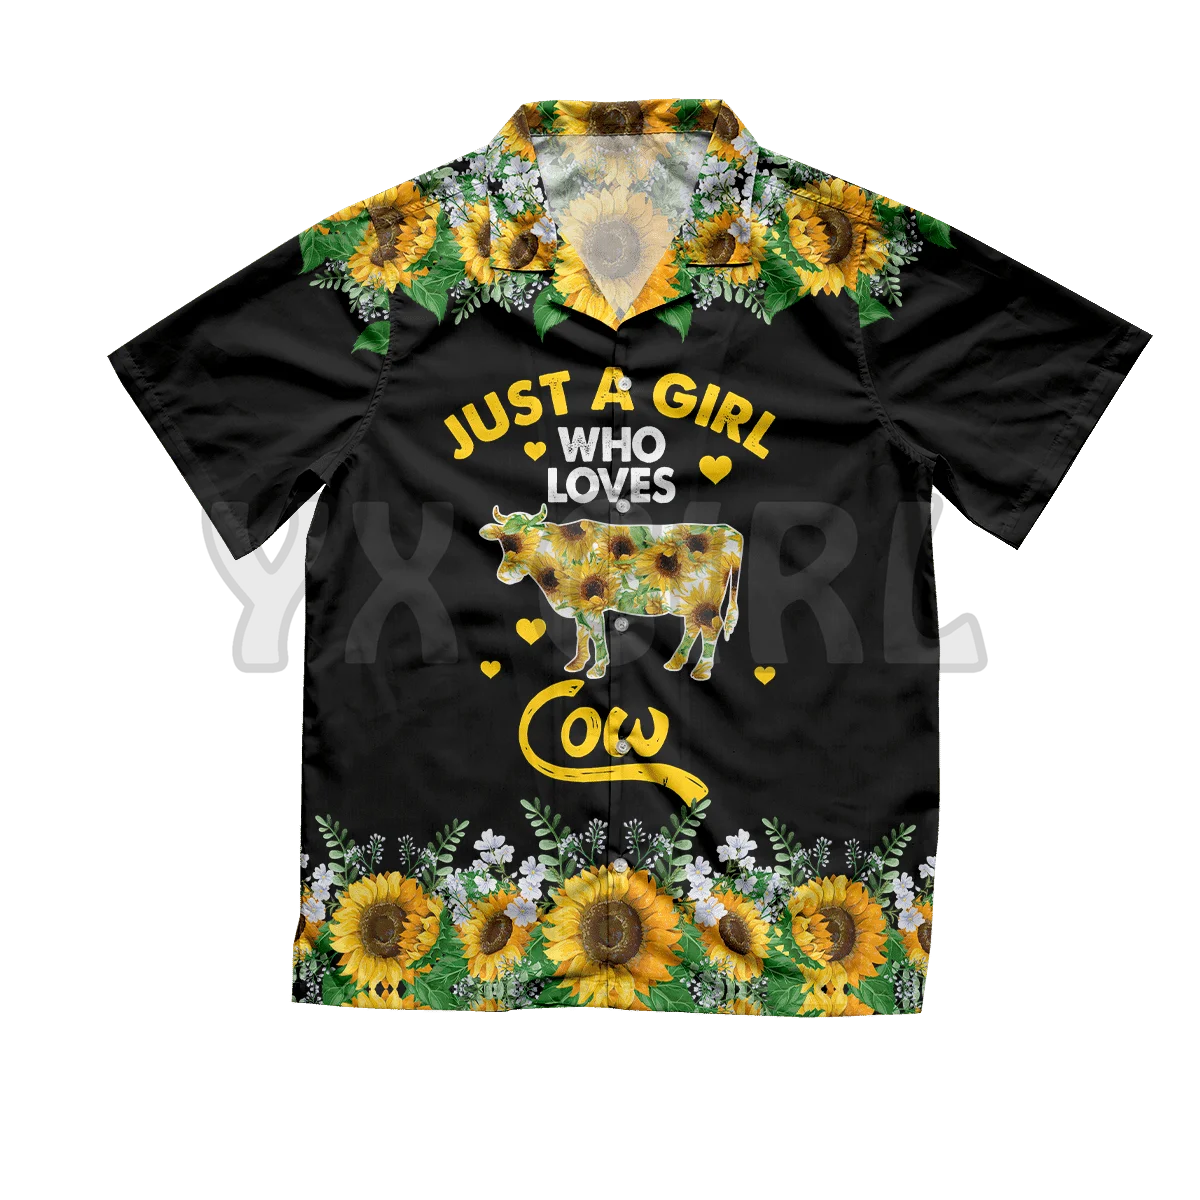 Sunflower Just a Girl Who Loves 3D All Over Printed Hawaiian Shirt Men's For Women's Harajuku Casual Shirt Unisex yx girl latin kings women rompers yellow bandana 3d all over printed rompers summer women s bohemia clothes